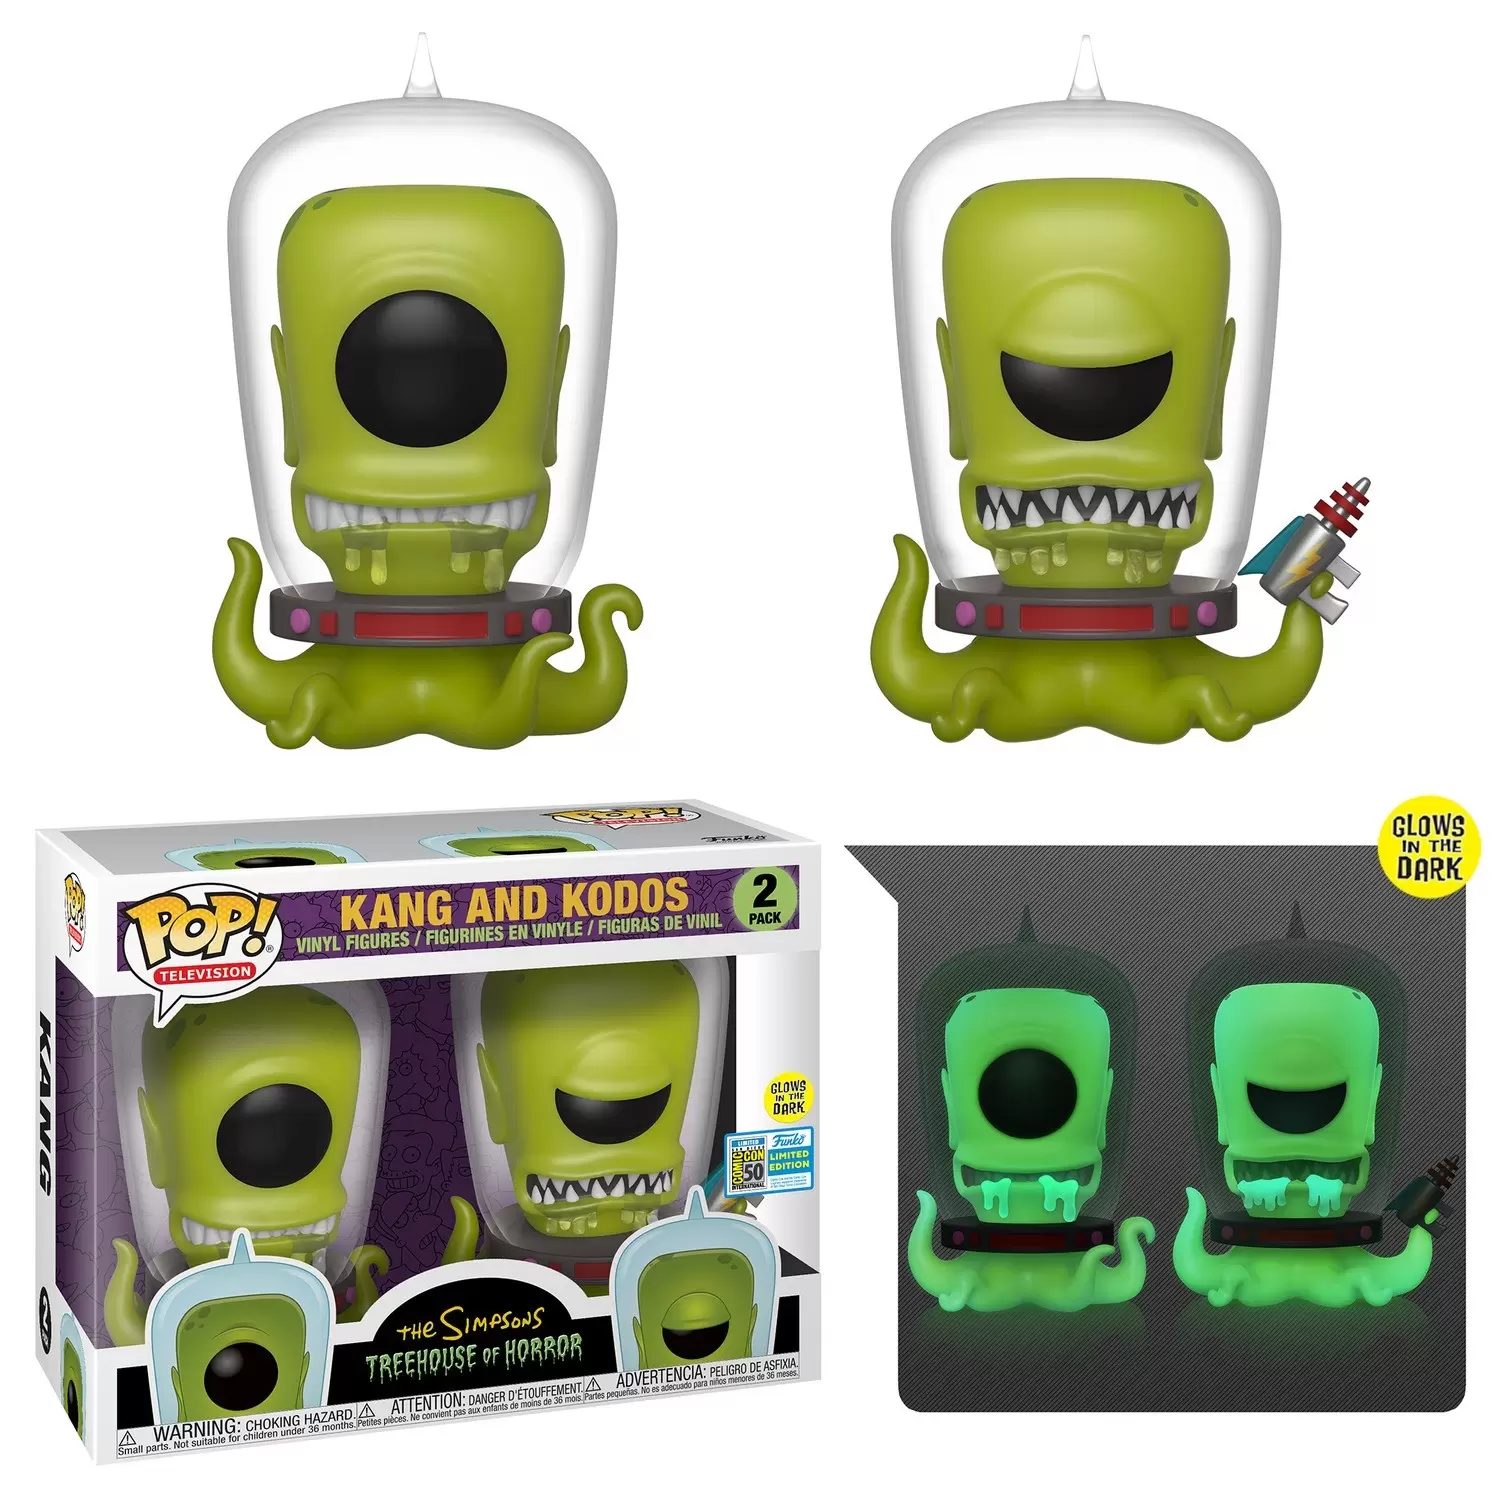 POP! Television - The Simpsons - Kang and Kodos 2 Pack GITD